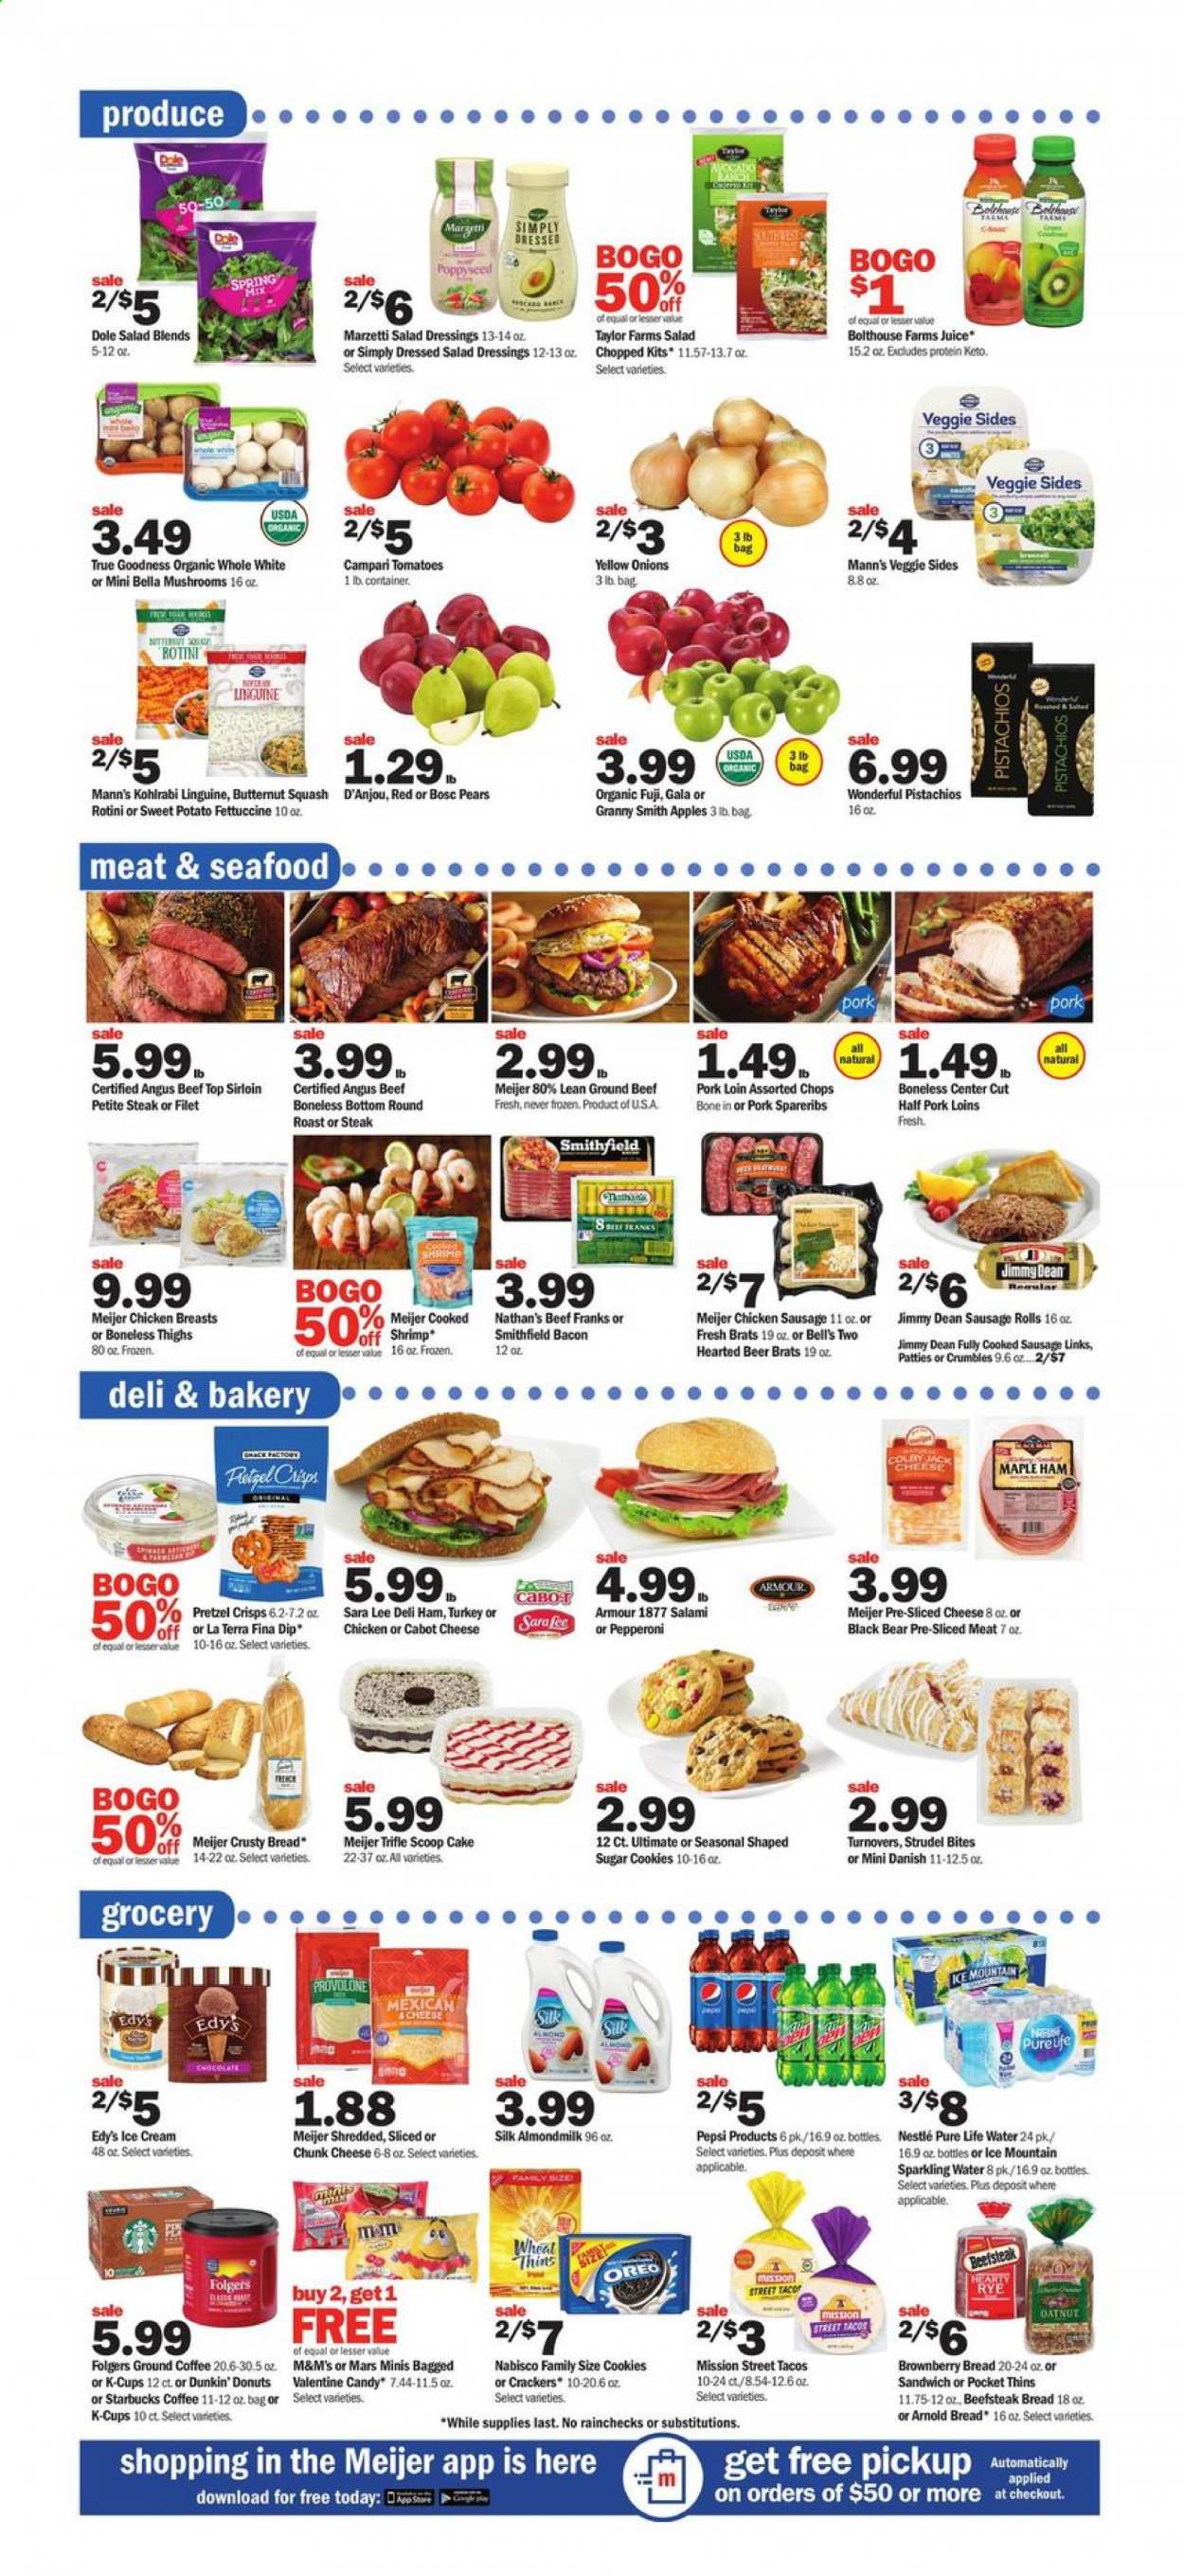 thumbnail - Meijer Flyer - 01/17/2021 - 01/23/2021 - Sales products - mushrooms, Dole, bread, sausage rolls, tacos, Sara Lee, turnovers, cake, donut, strudel, Dunkin' Donuts, danish pastry, apples, pears, seafood, shrimps, sandwich, Jimmy Dean, bacon, salami, ham, sausage, pepperoni, chicken sausage, sliced cheese, cheese, Oreo, almond milk, dip, ice cream, sweet potato, cookies, Nestlé, Mars, M&M's, crackers, Thins, pretzel crisps, sugar, salad dressing, pistachios, Pepsi, juice, sparkling water, Pure Life Water, Ice Mountain, coffee, Starbucks, Folgers, ground coffee, coffee capsules, K-Cups, beer, chicken breasts, beef meat, ground beef, steak, round roast, pork loin, pork meat, pork spare ribs, Bella, Lee. Page 3.